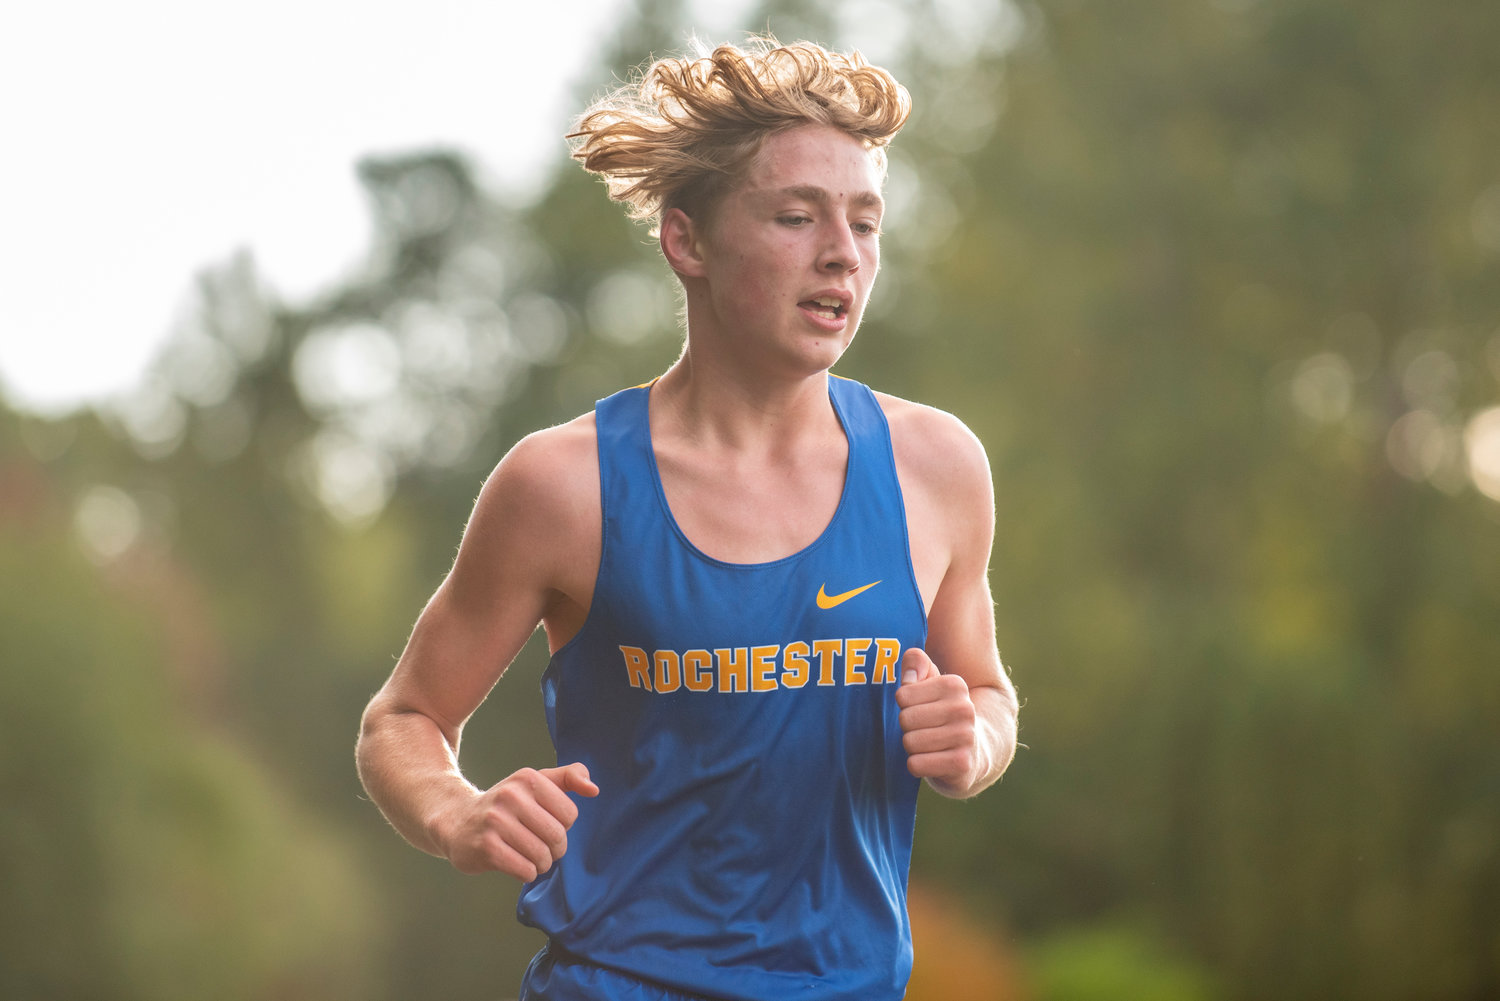 Rochester's Taydee Evenstar races in a cross country meet at Stan Hedwall Park on Wednesday, Oct. 6, 2021.